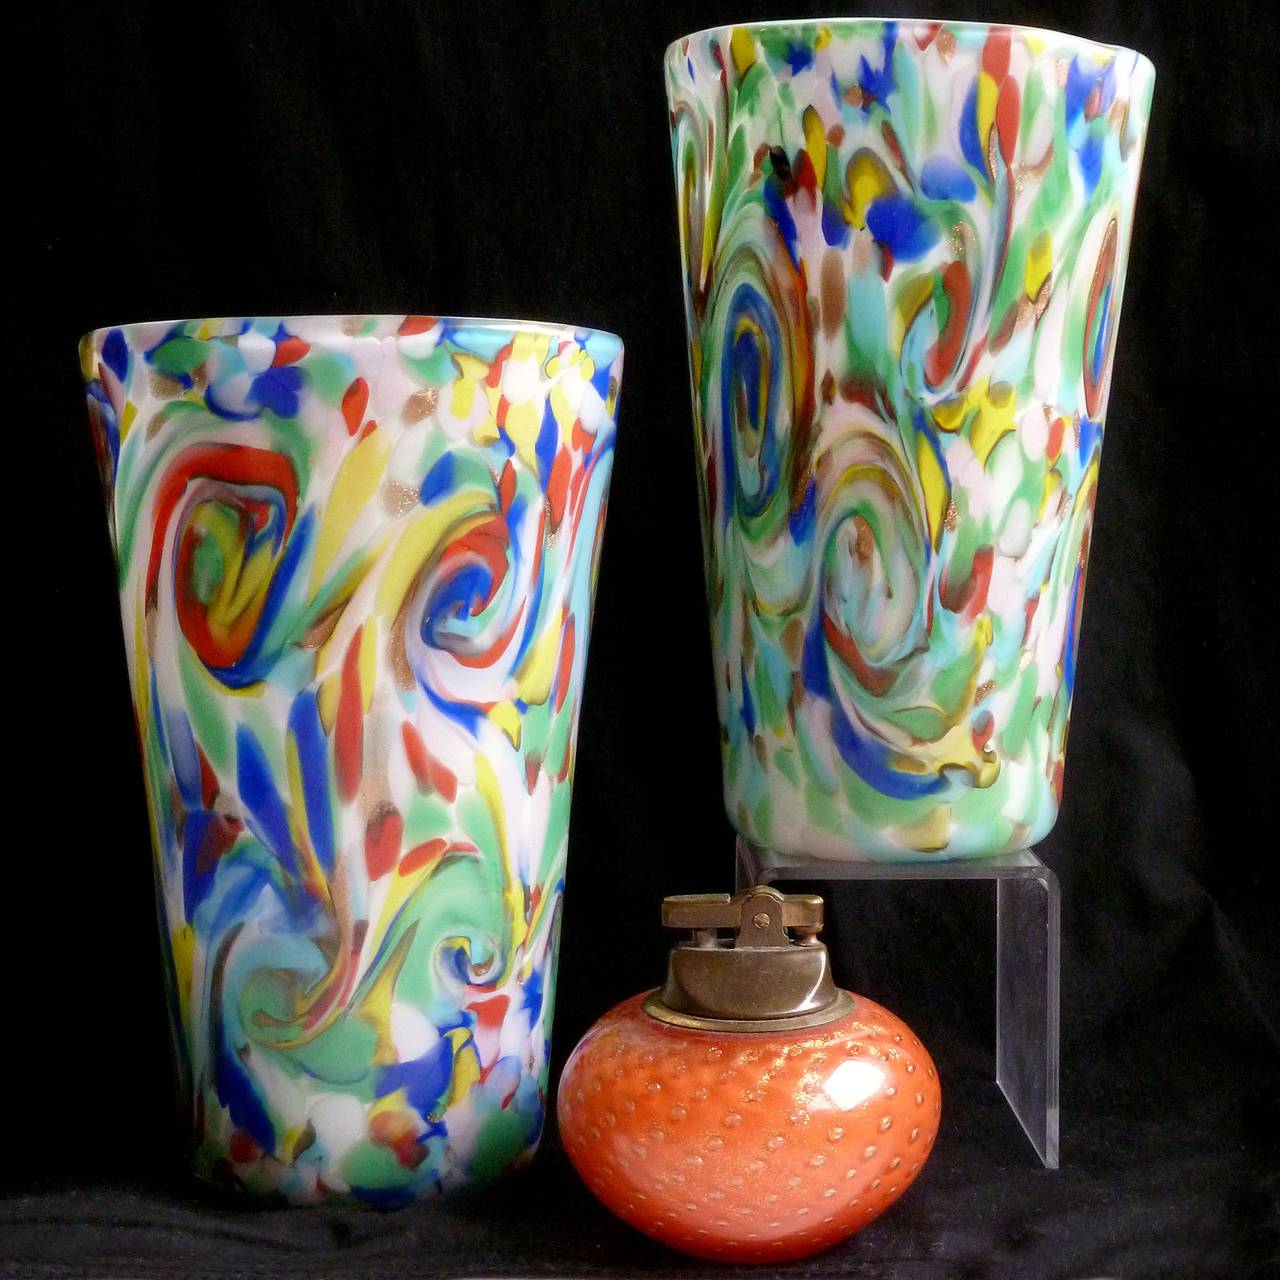 FREE Shipping Worldwide! See details below description.

Beautiful and Colorful Murano Hand Blown Rainbow Color Swirls over White Art Glass Flower Vases. Documented to the Fratelli Toso company, in the 